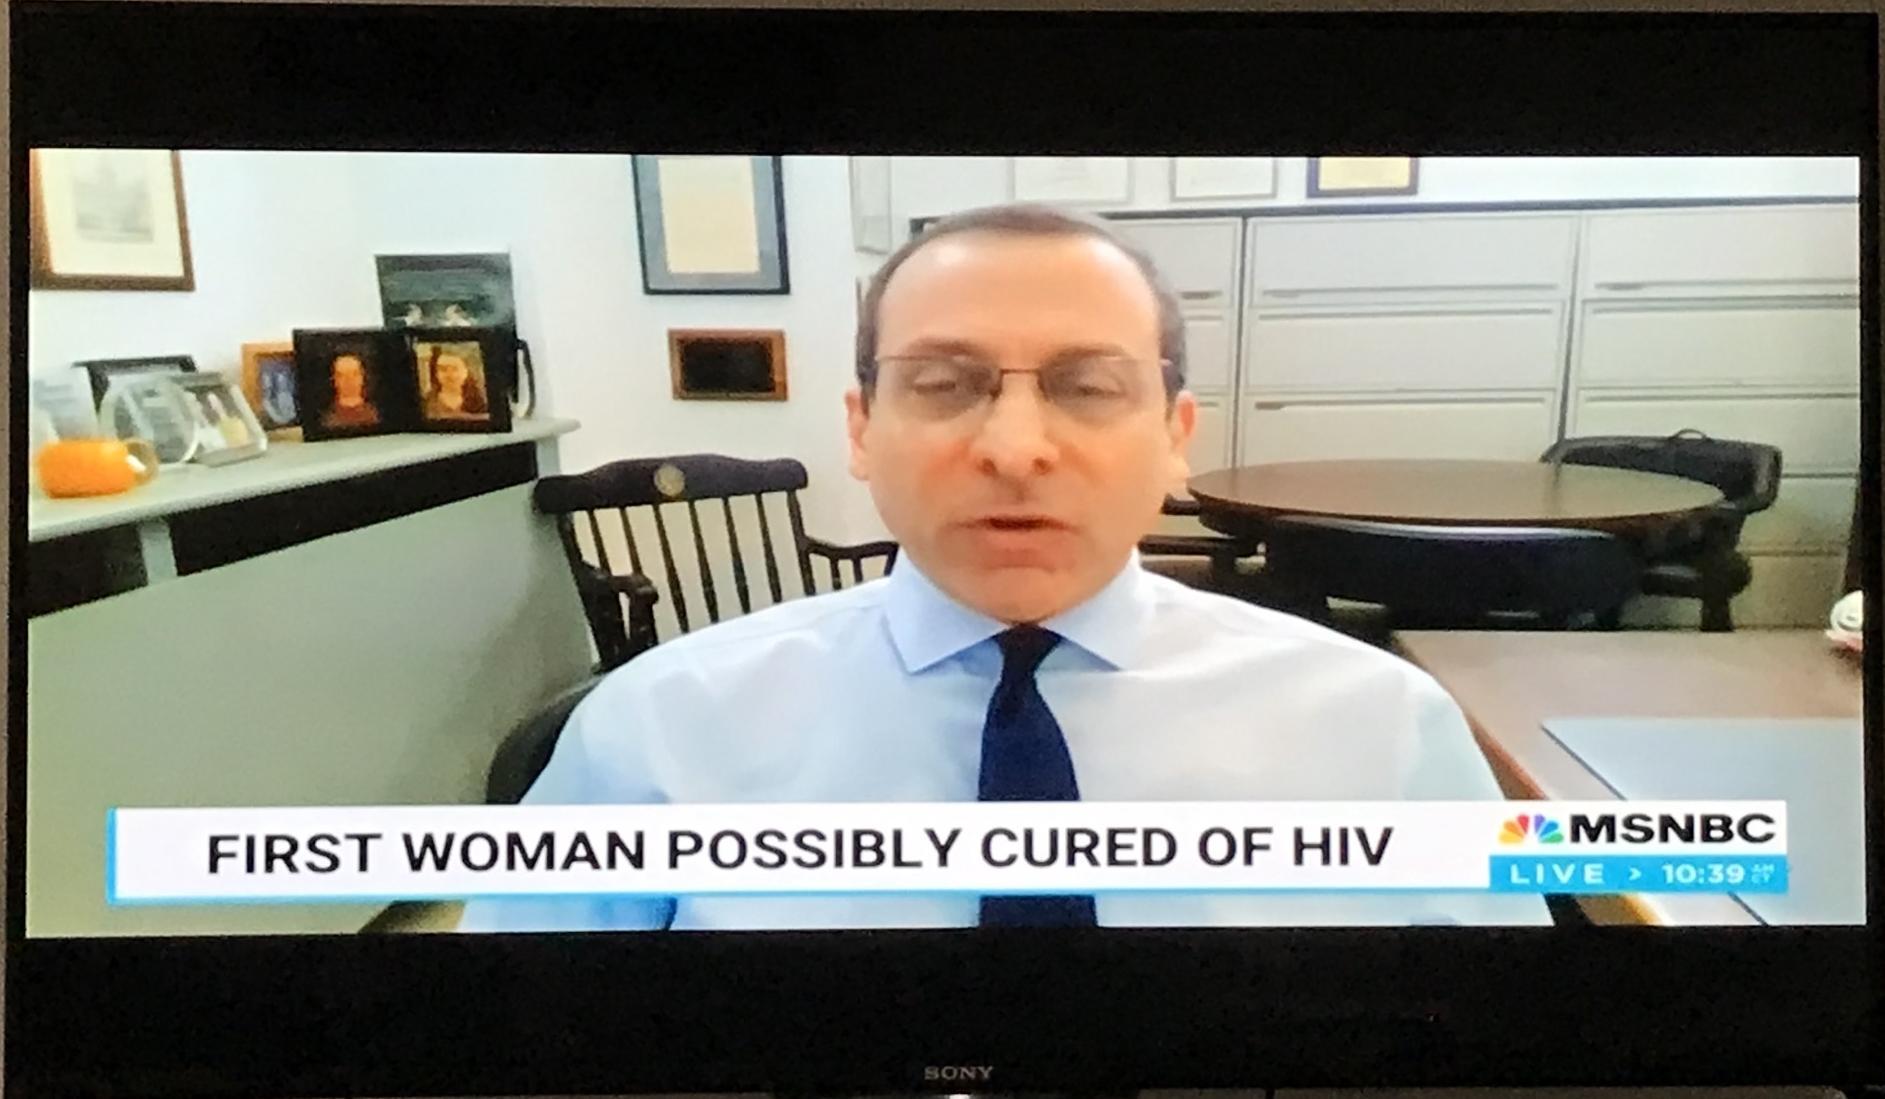 Dr. Glesby is interviewed on MSNBC.